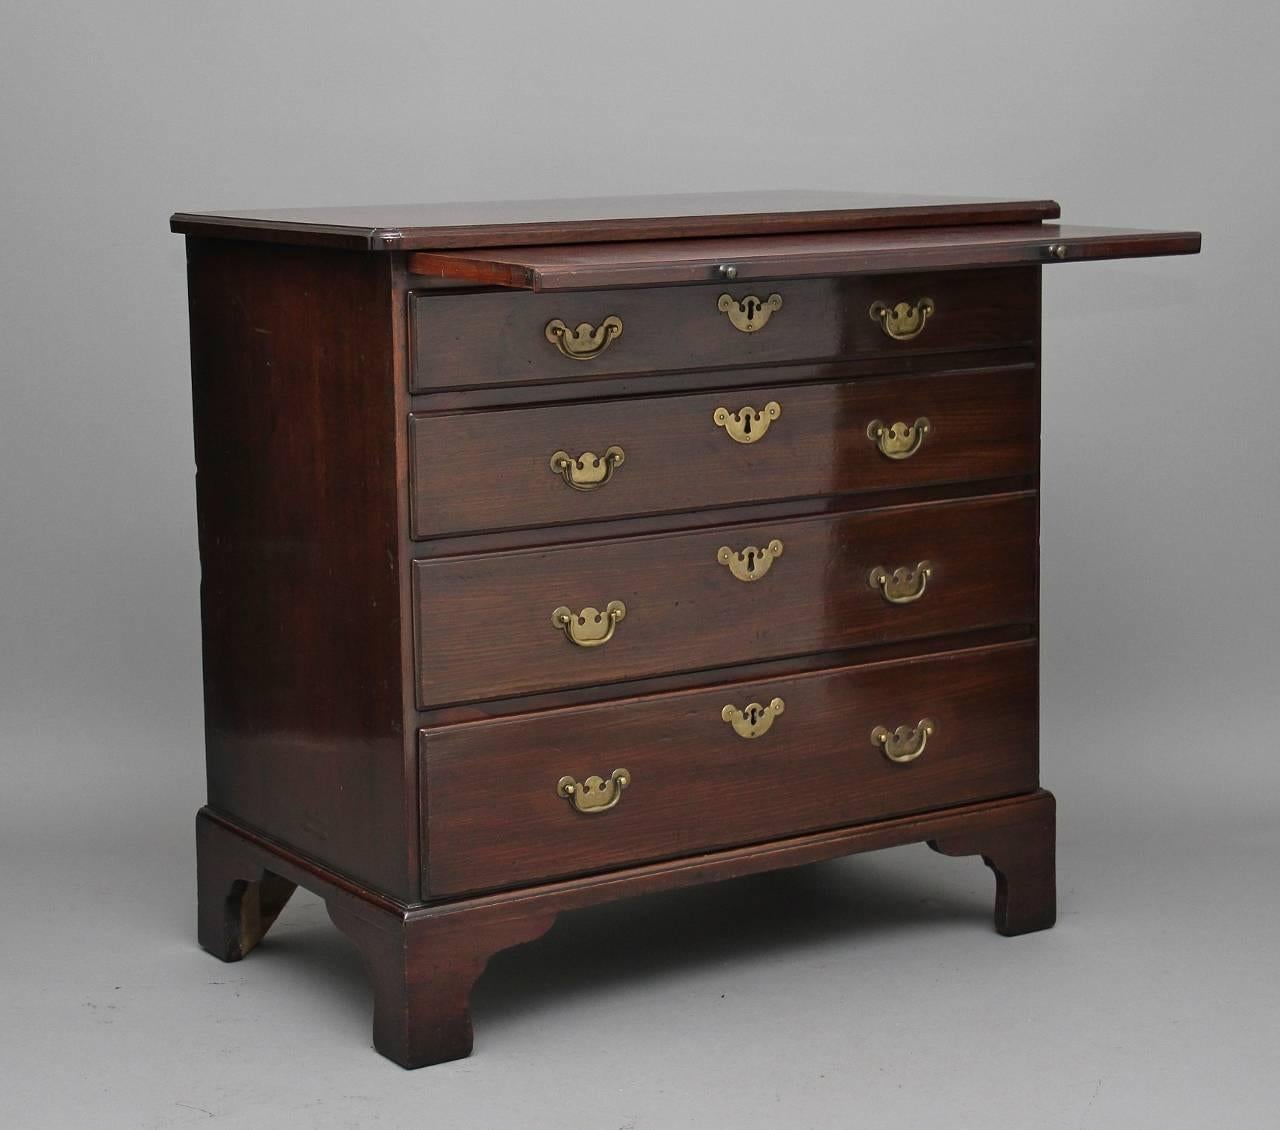 18th century mahogany chest of drawers, the rectangular top having a nice moulded edge, with a brushing slide below, four long oak lined graduated drawers with brass plate handles and escutcheons, supported on bracket feet, circa 1780.